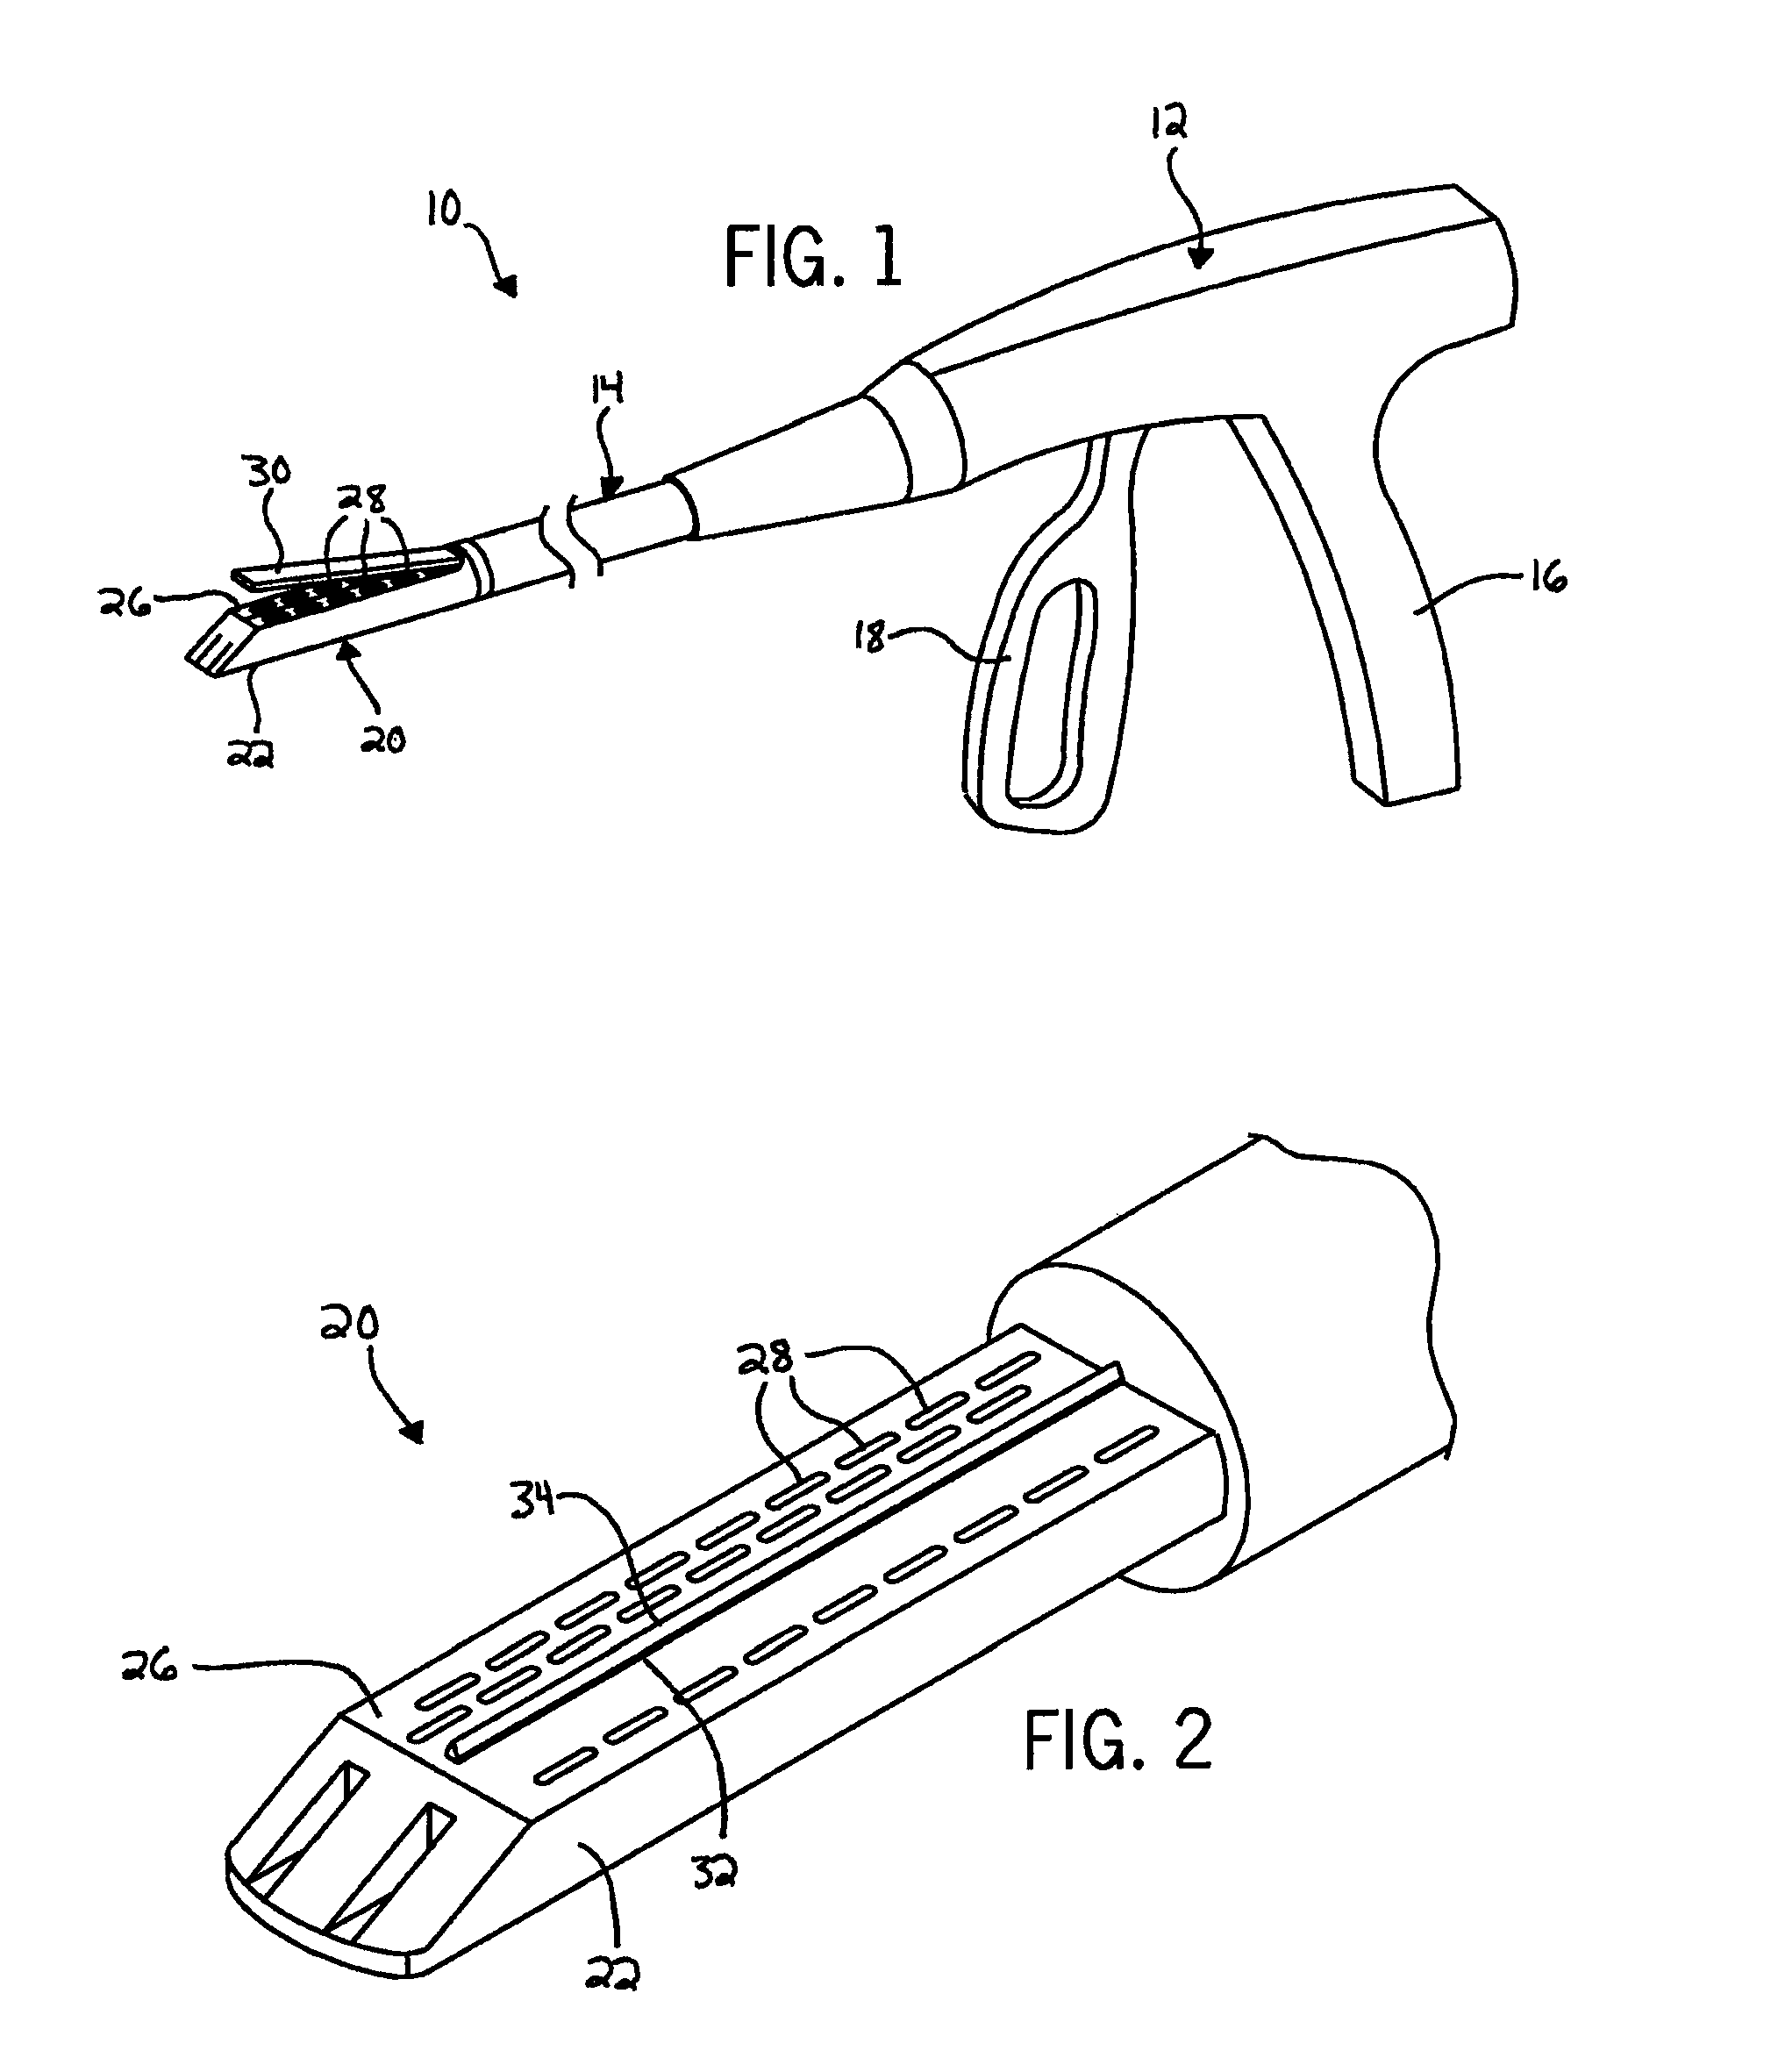 Apparatus and method for preserving a tissue margin